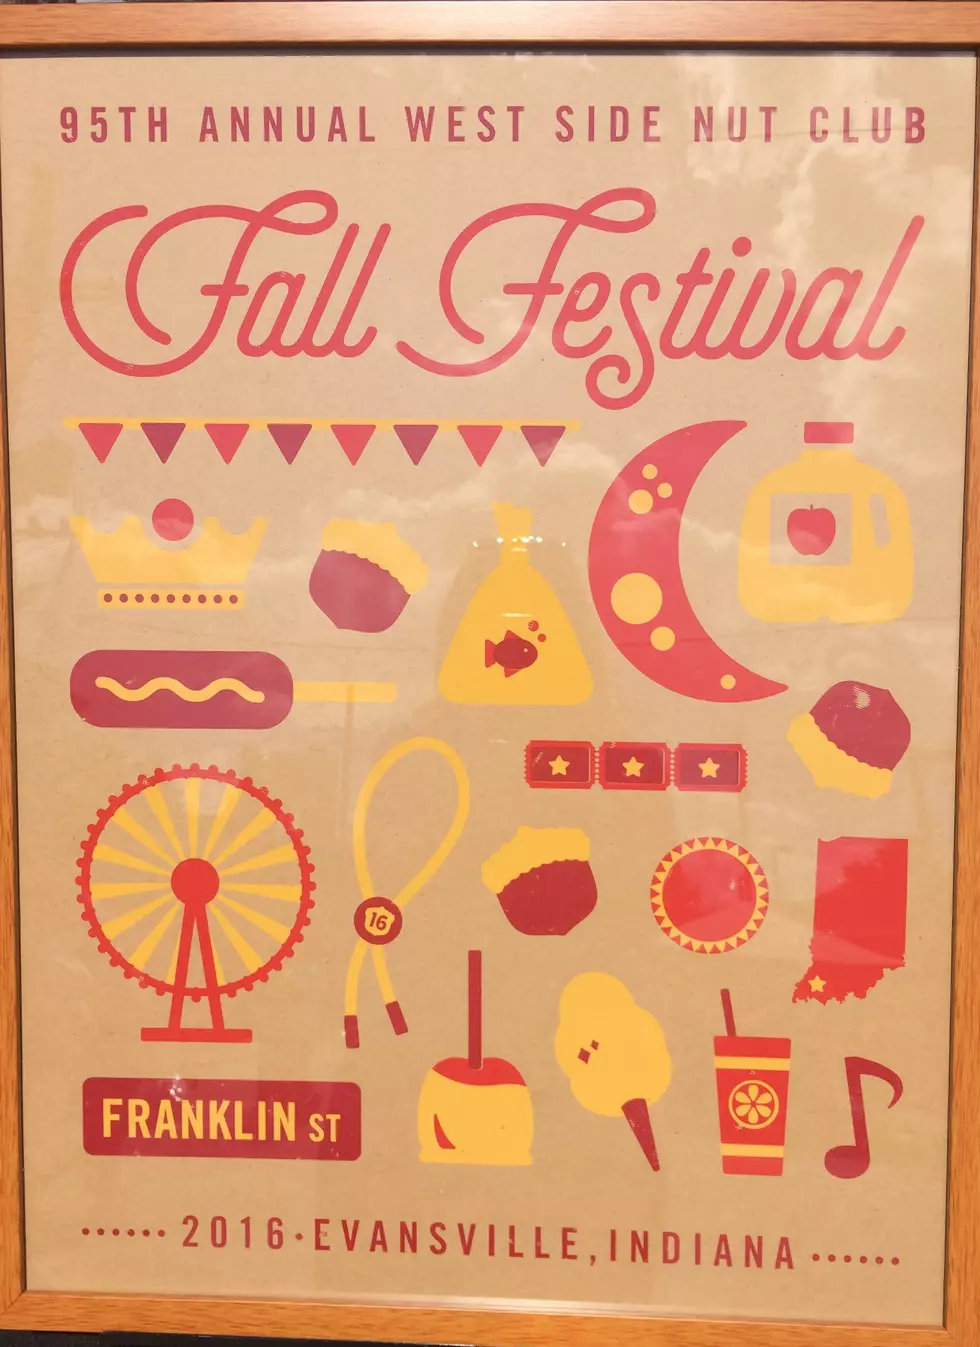 What Are Some of Your New or All-Time Favorites at the Fall Festival?